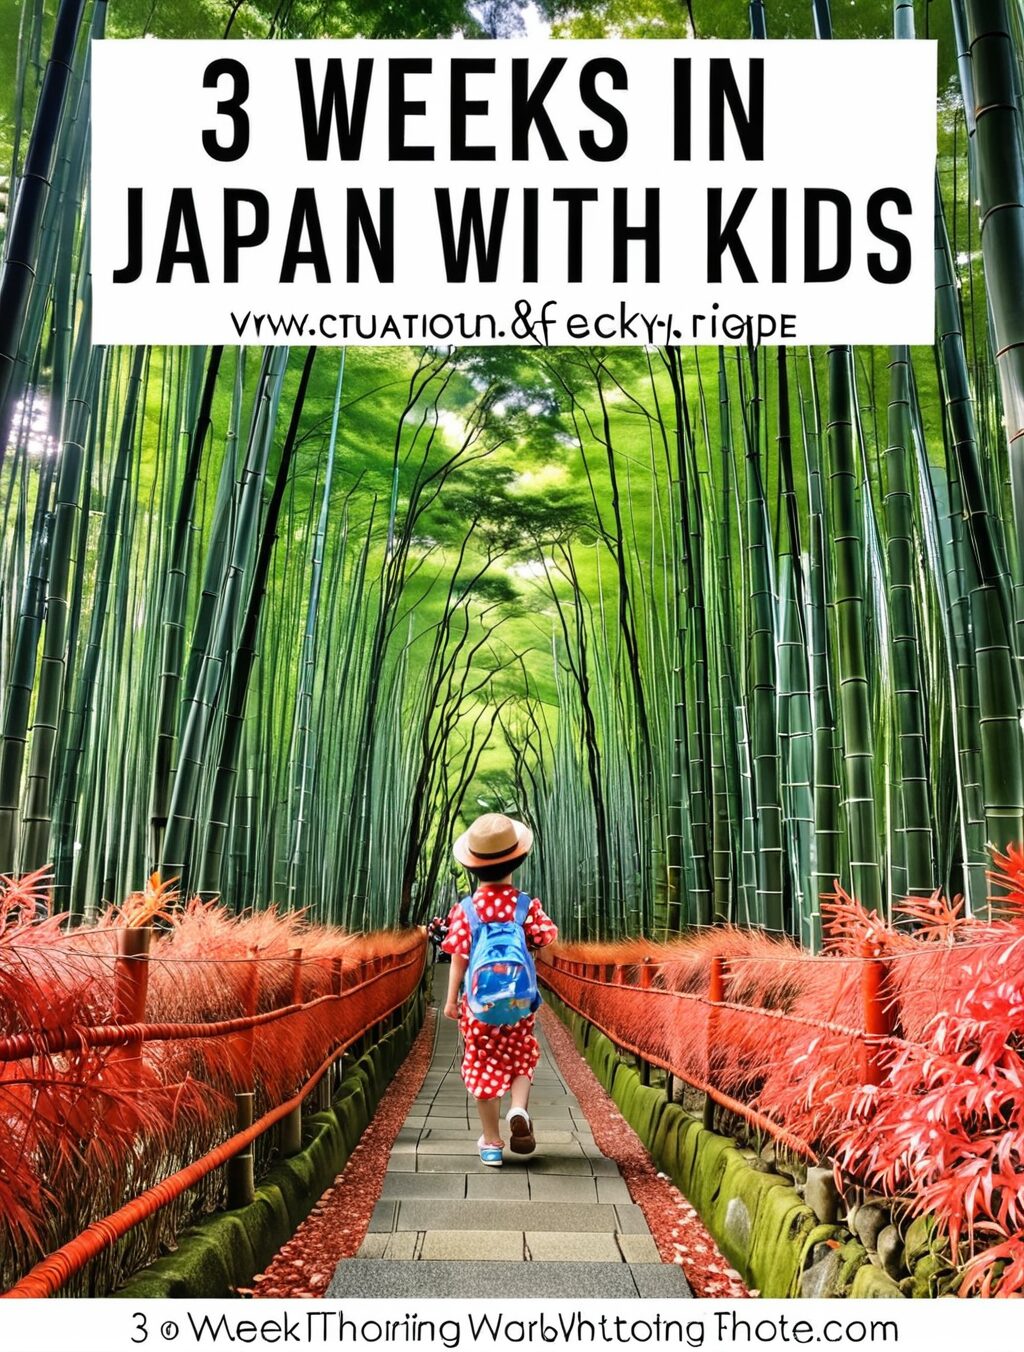 3 week japan itinerary with kids